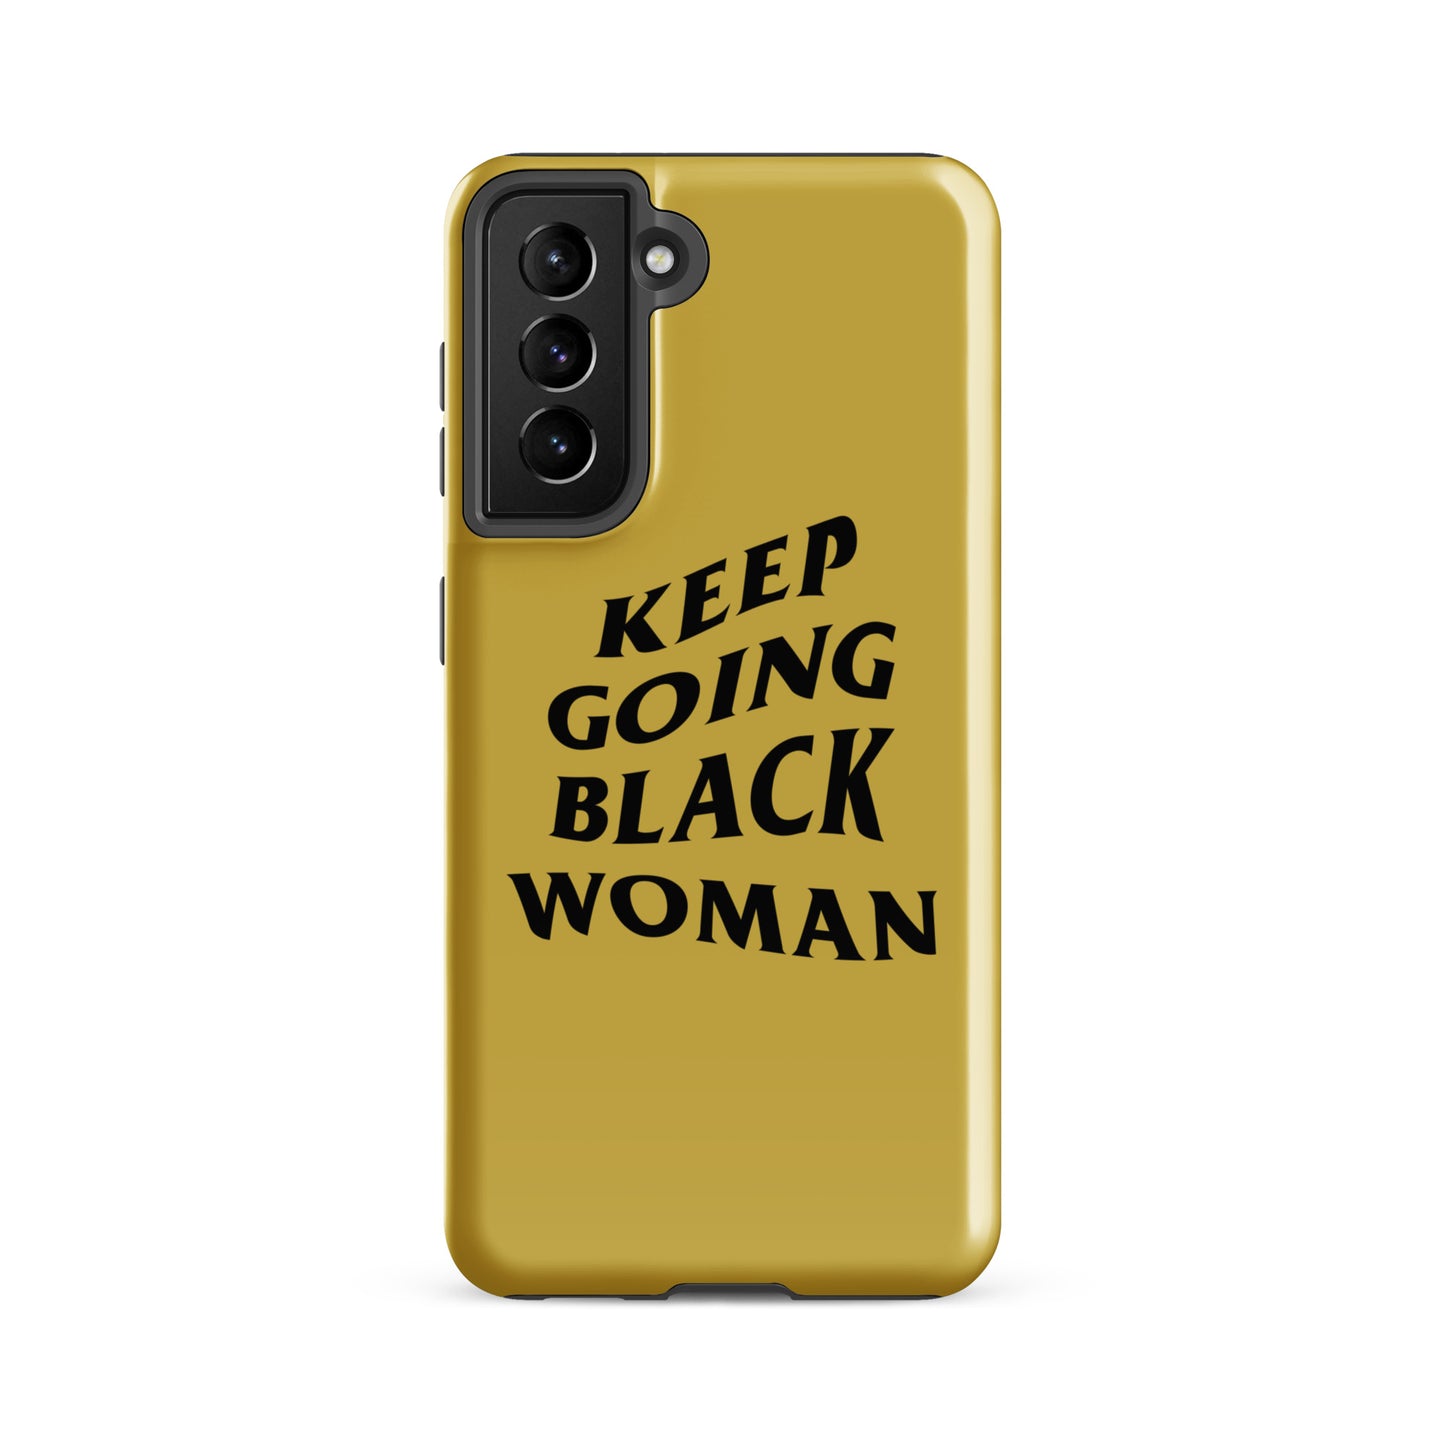 Keep Going Black Woman Tough case for Samsung® (Gold)